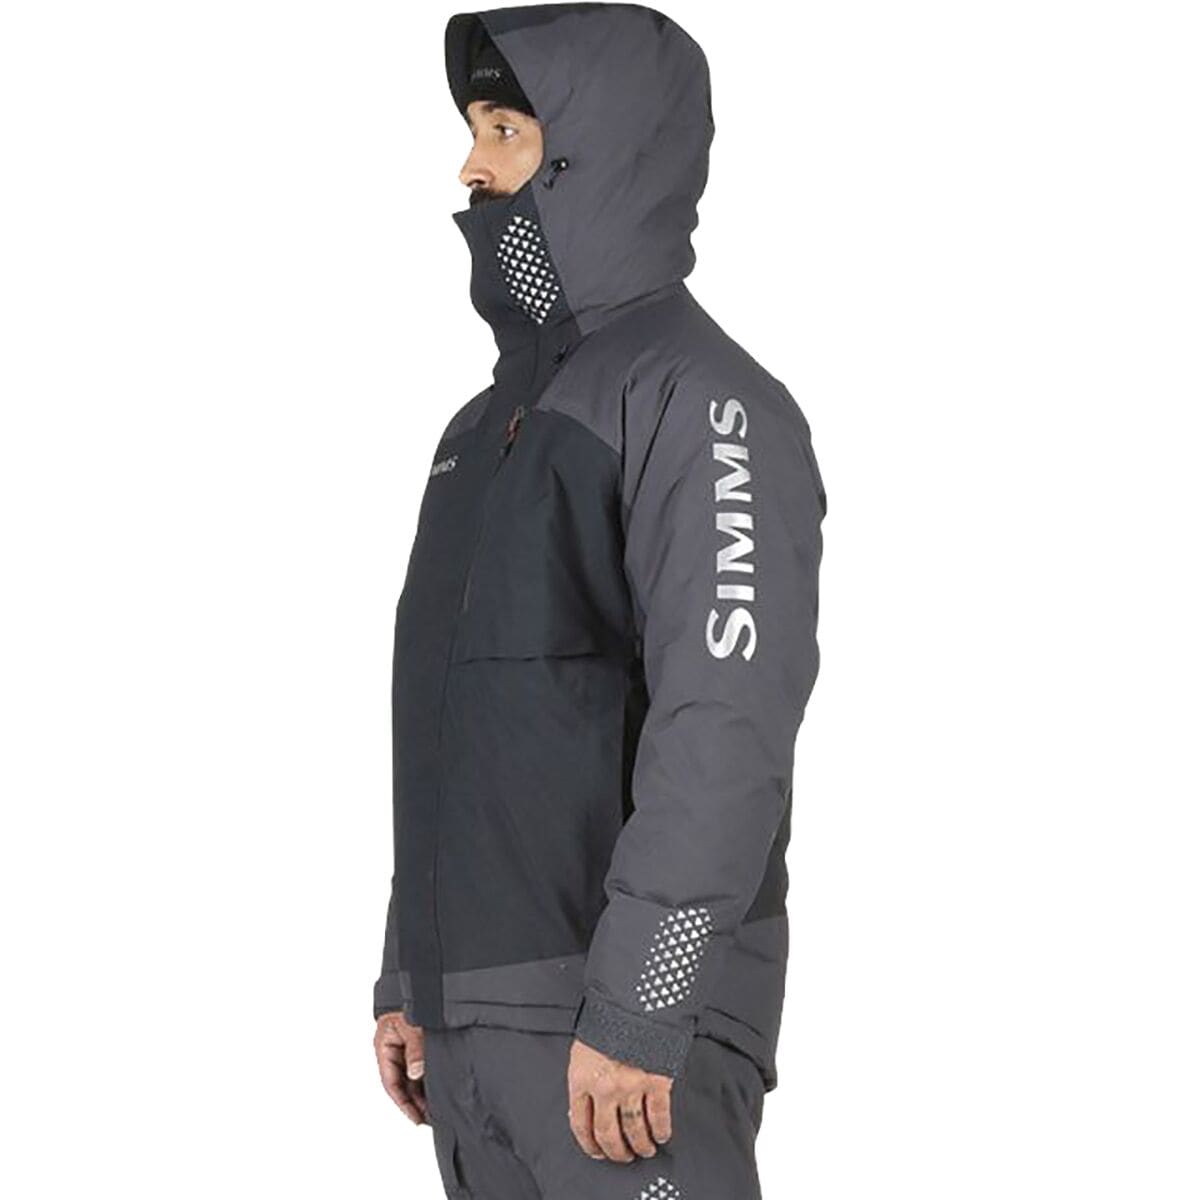 Simms Challenger Insulated Jacket - Men's - Clothing